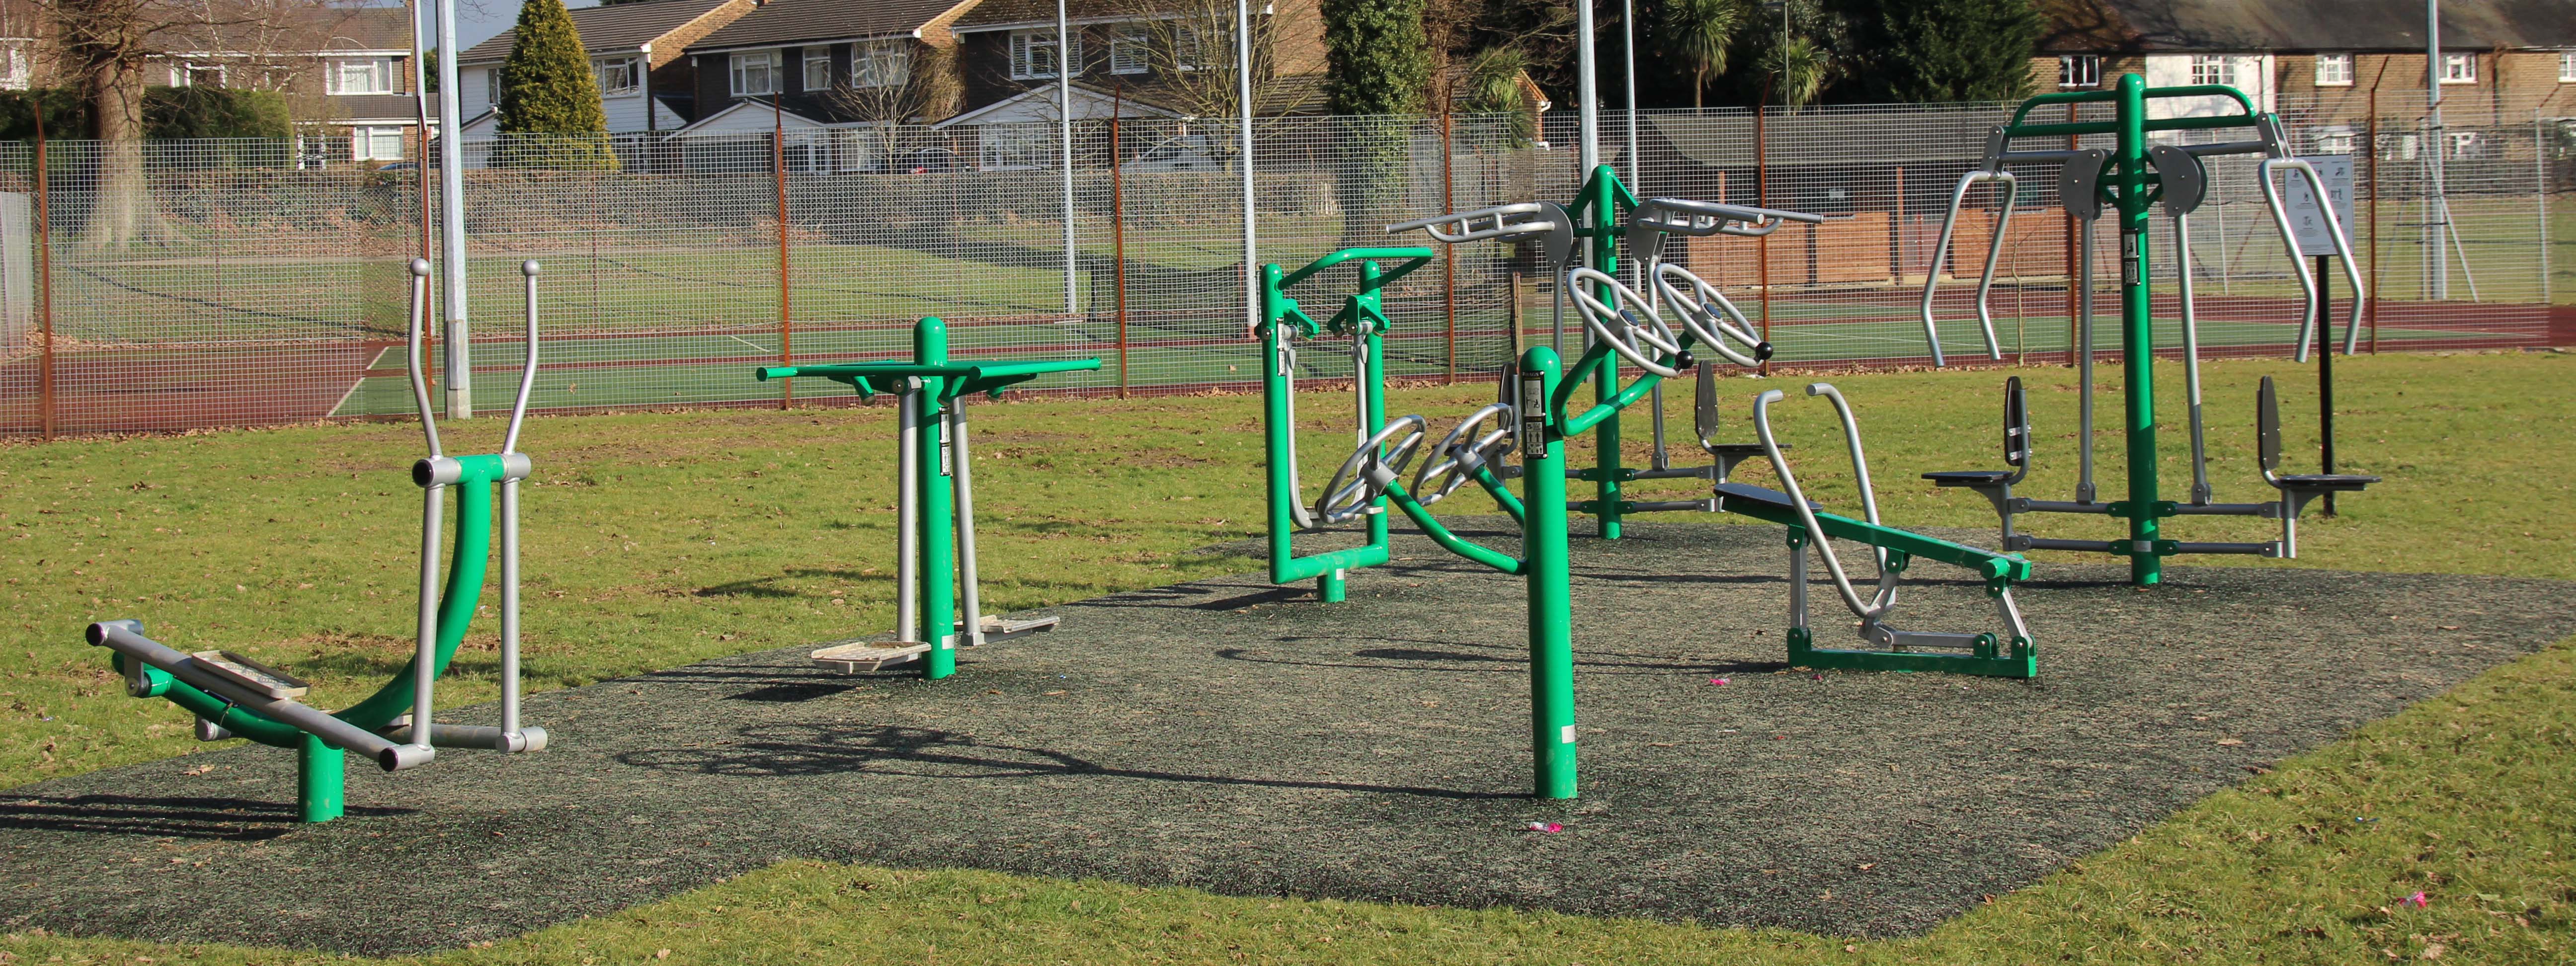 New outdoor exercise equipment installed – Holland Sports & Social